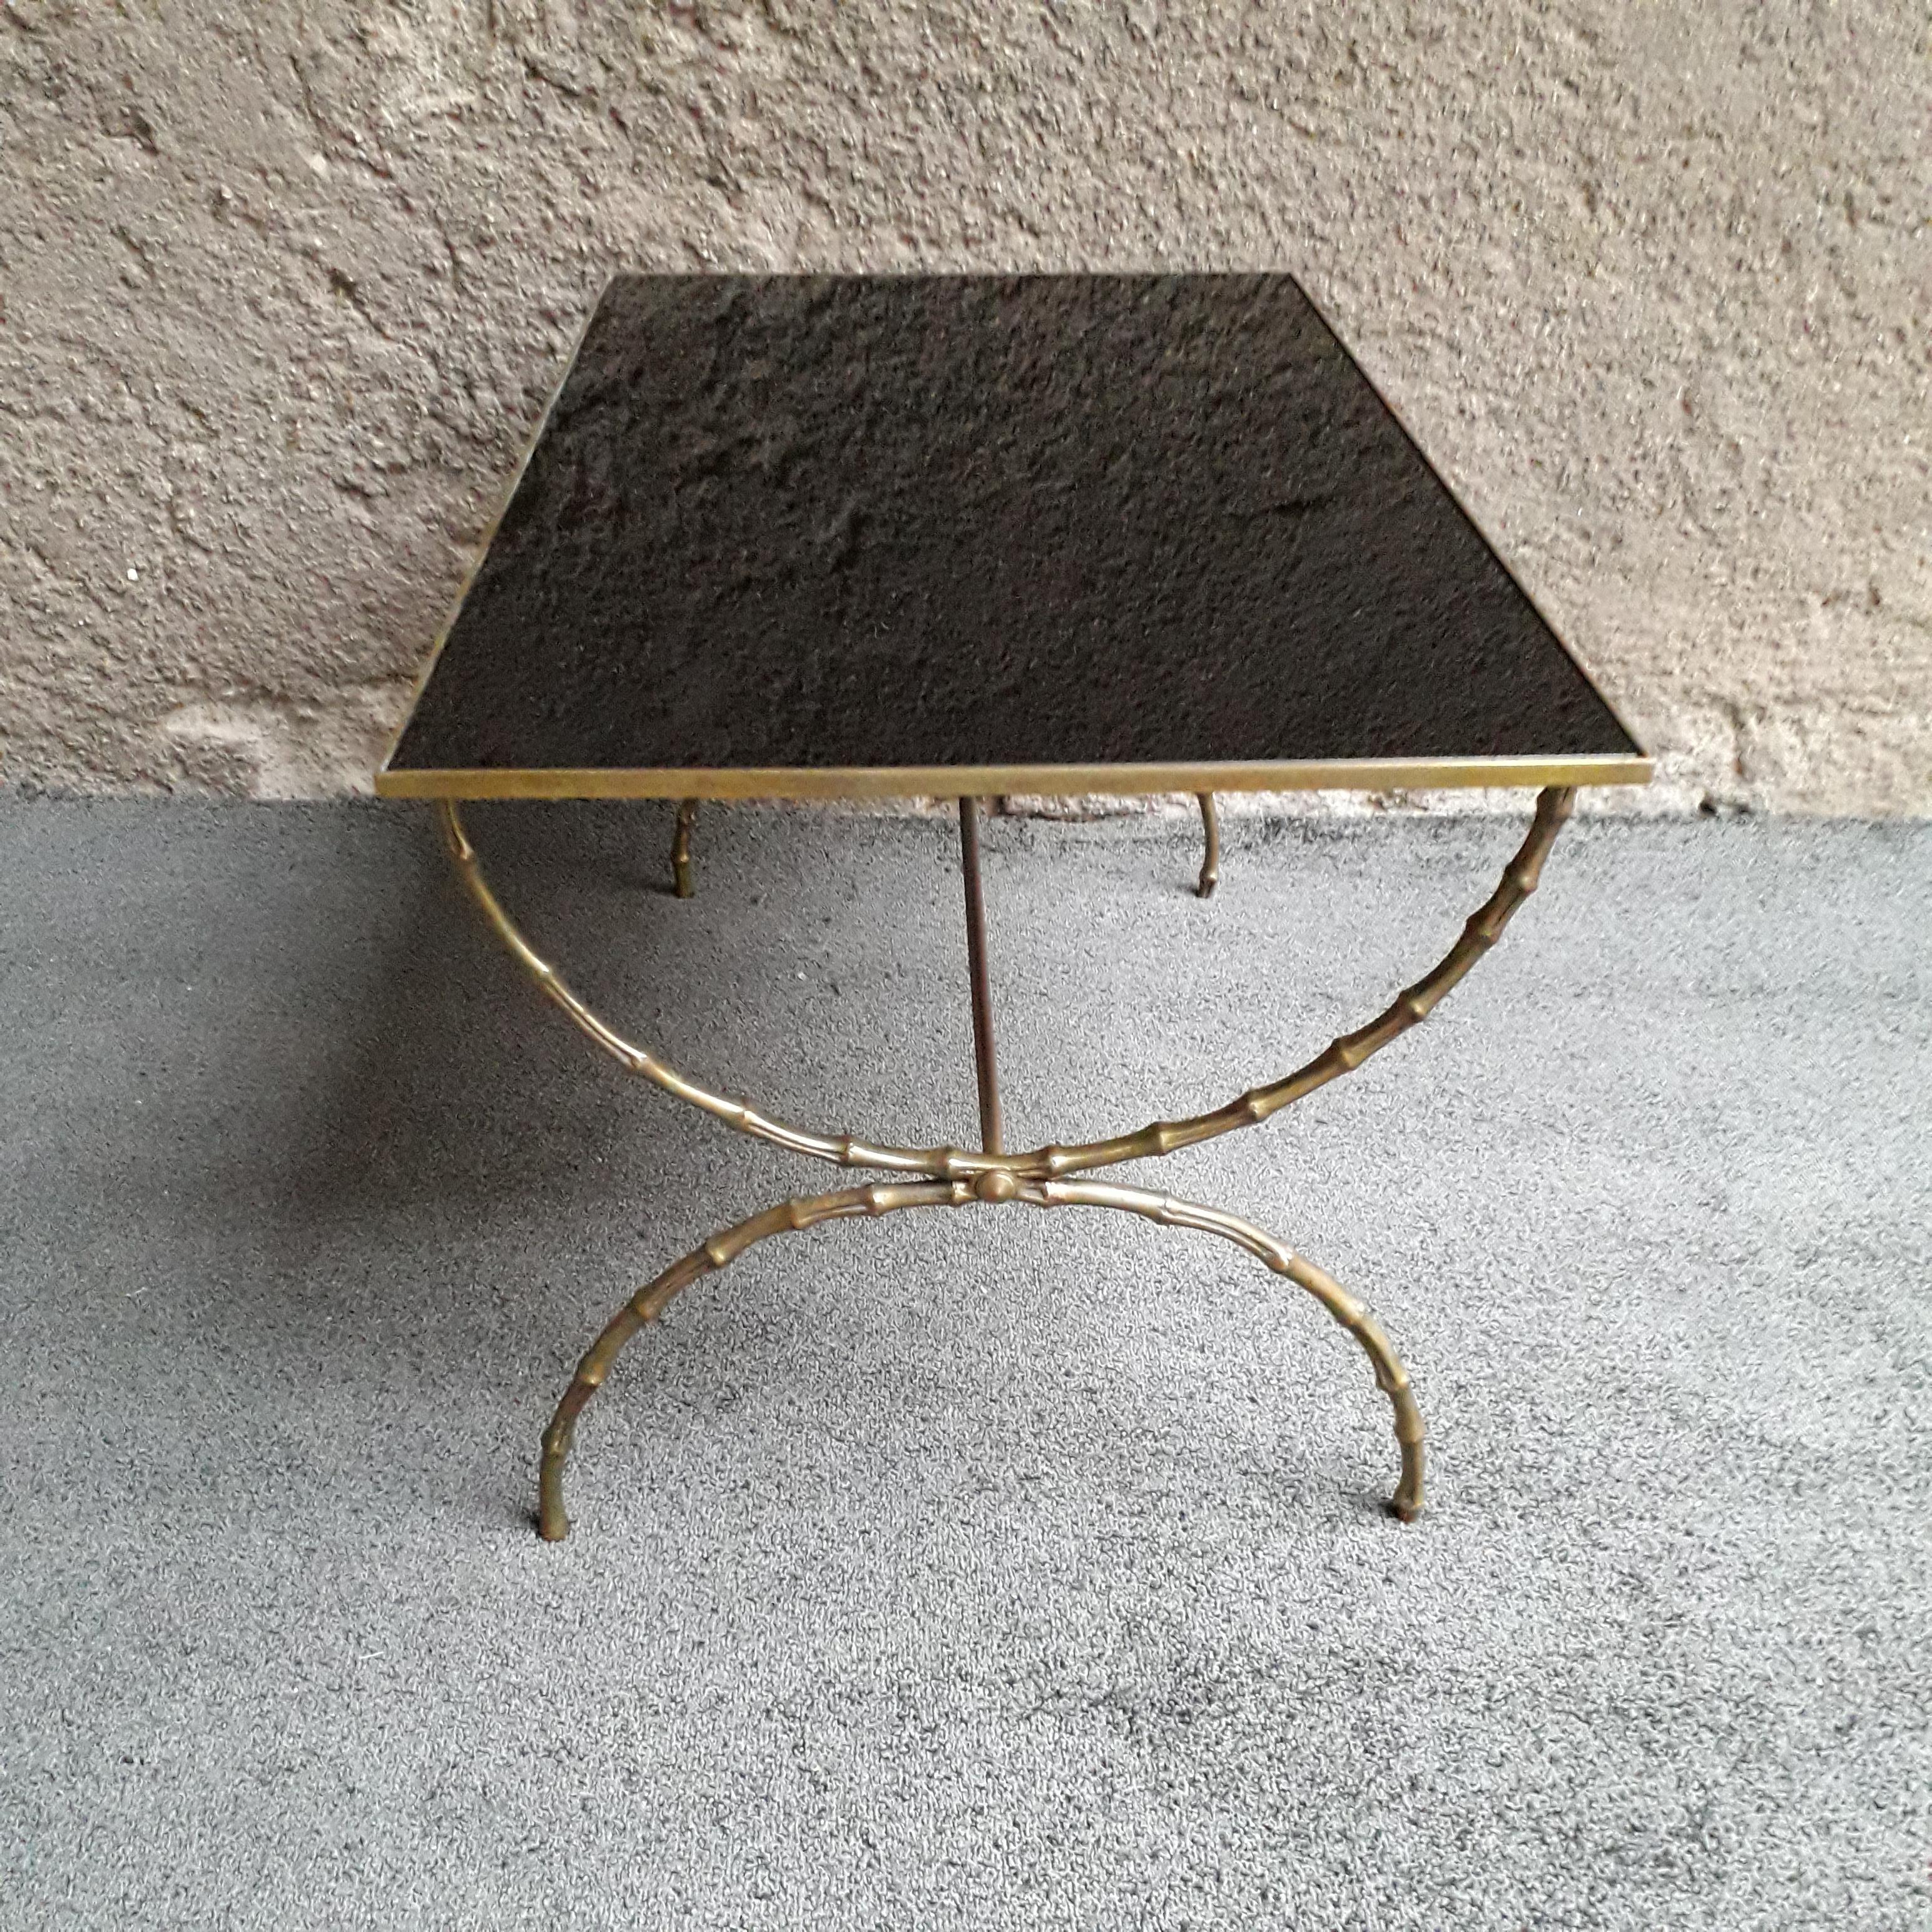 Coffee table by Maison Baguès with a bamboo shape bronze baseand a black opaline top, circa 1960.
Original tray.
Measures: Length 75.5 cm, width 45.5 cm, height 45.5 cm.